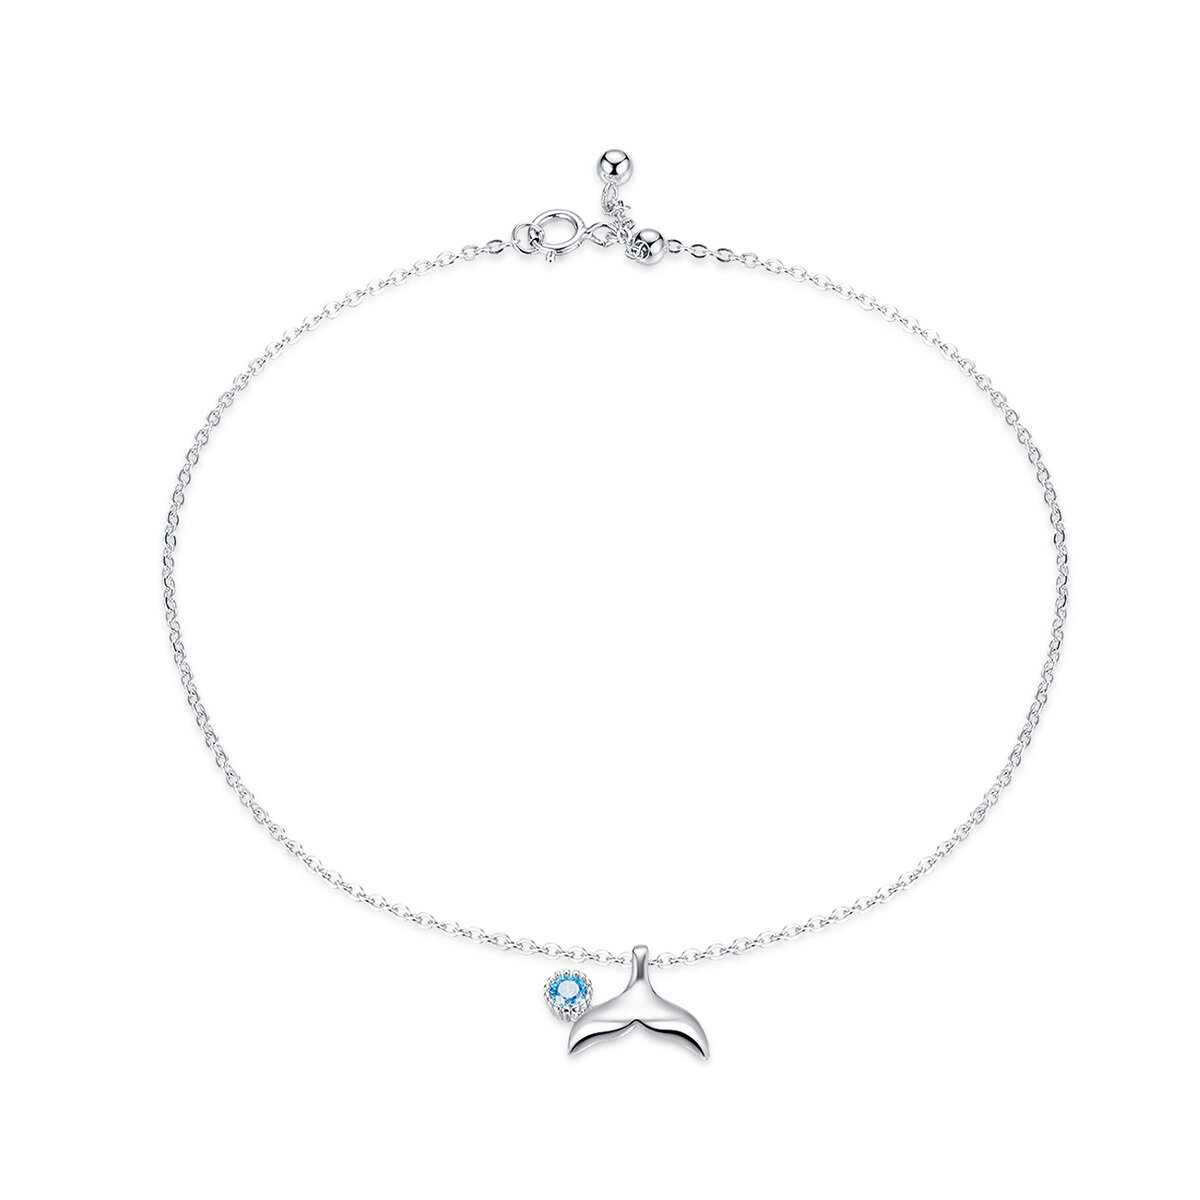 GemKing SCT004 Mermaid Tail-Silver Anklet S925 Sterling Silver Anklet